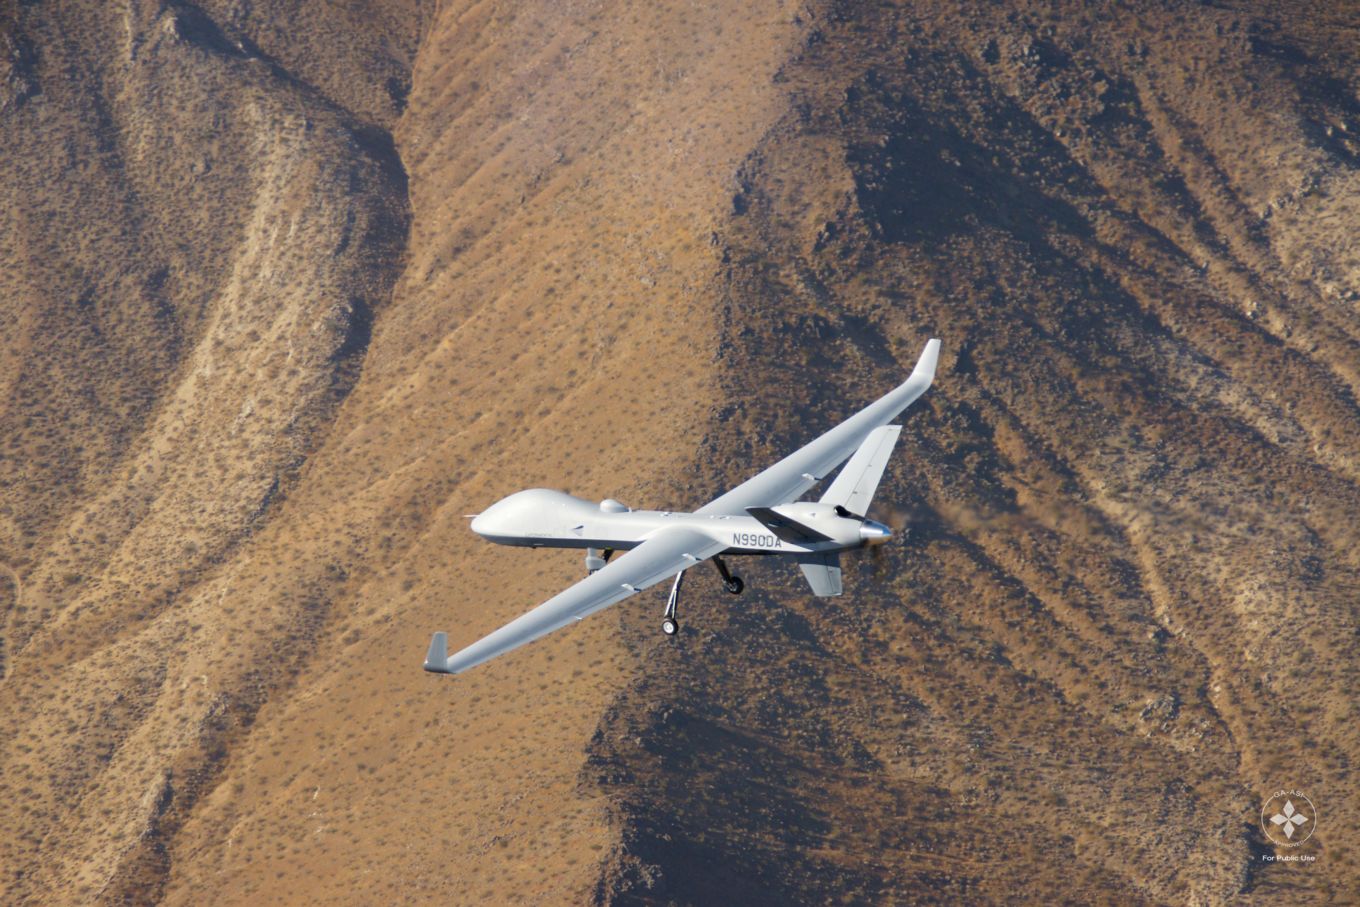 Image shows the Protector aircraft flying above land.